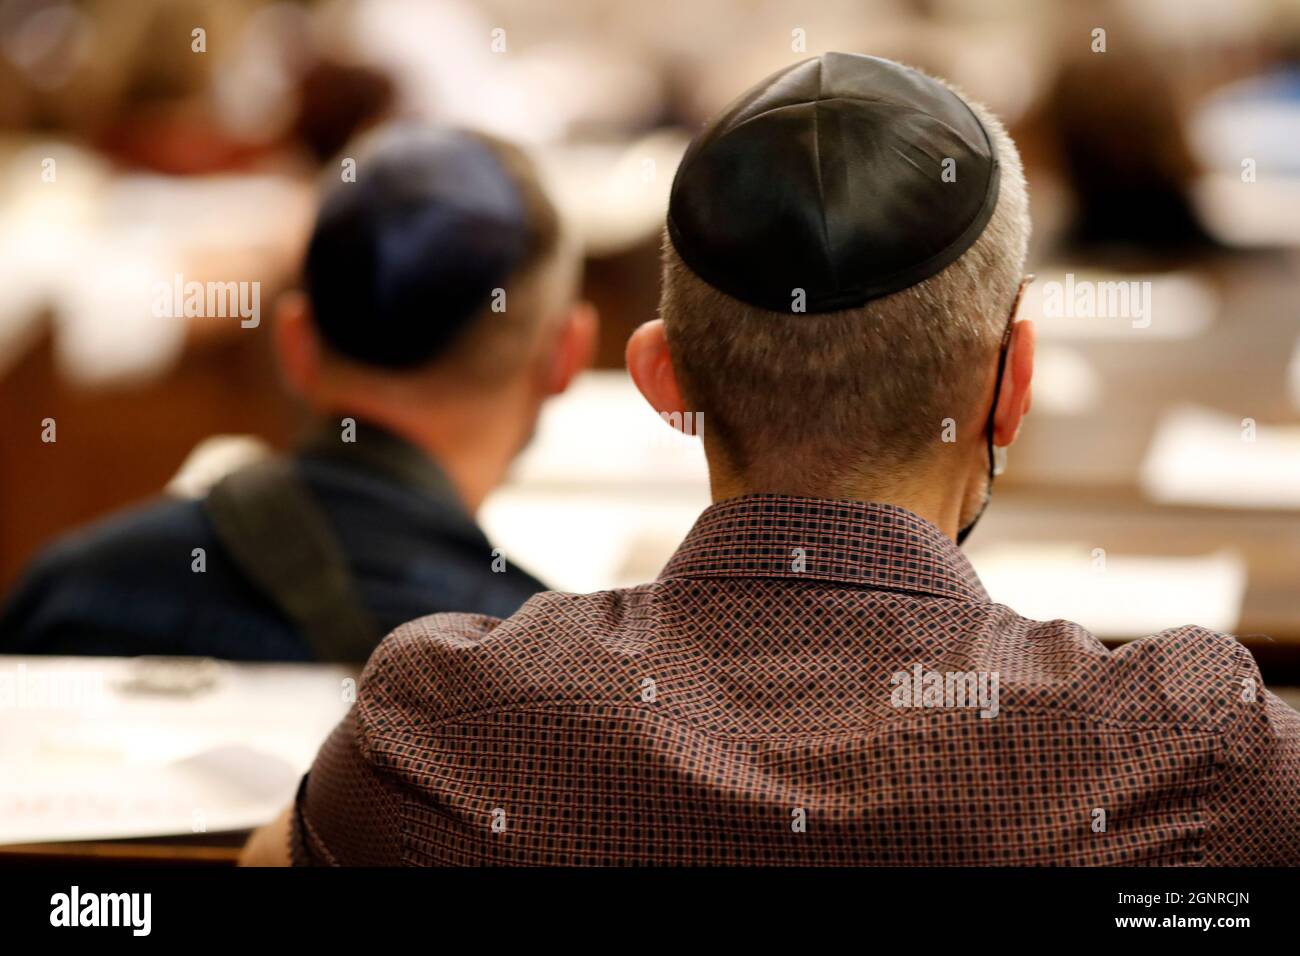 Jewish man wearing a kippah in a synagogue.  Trieste. Italy. Stock Photo